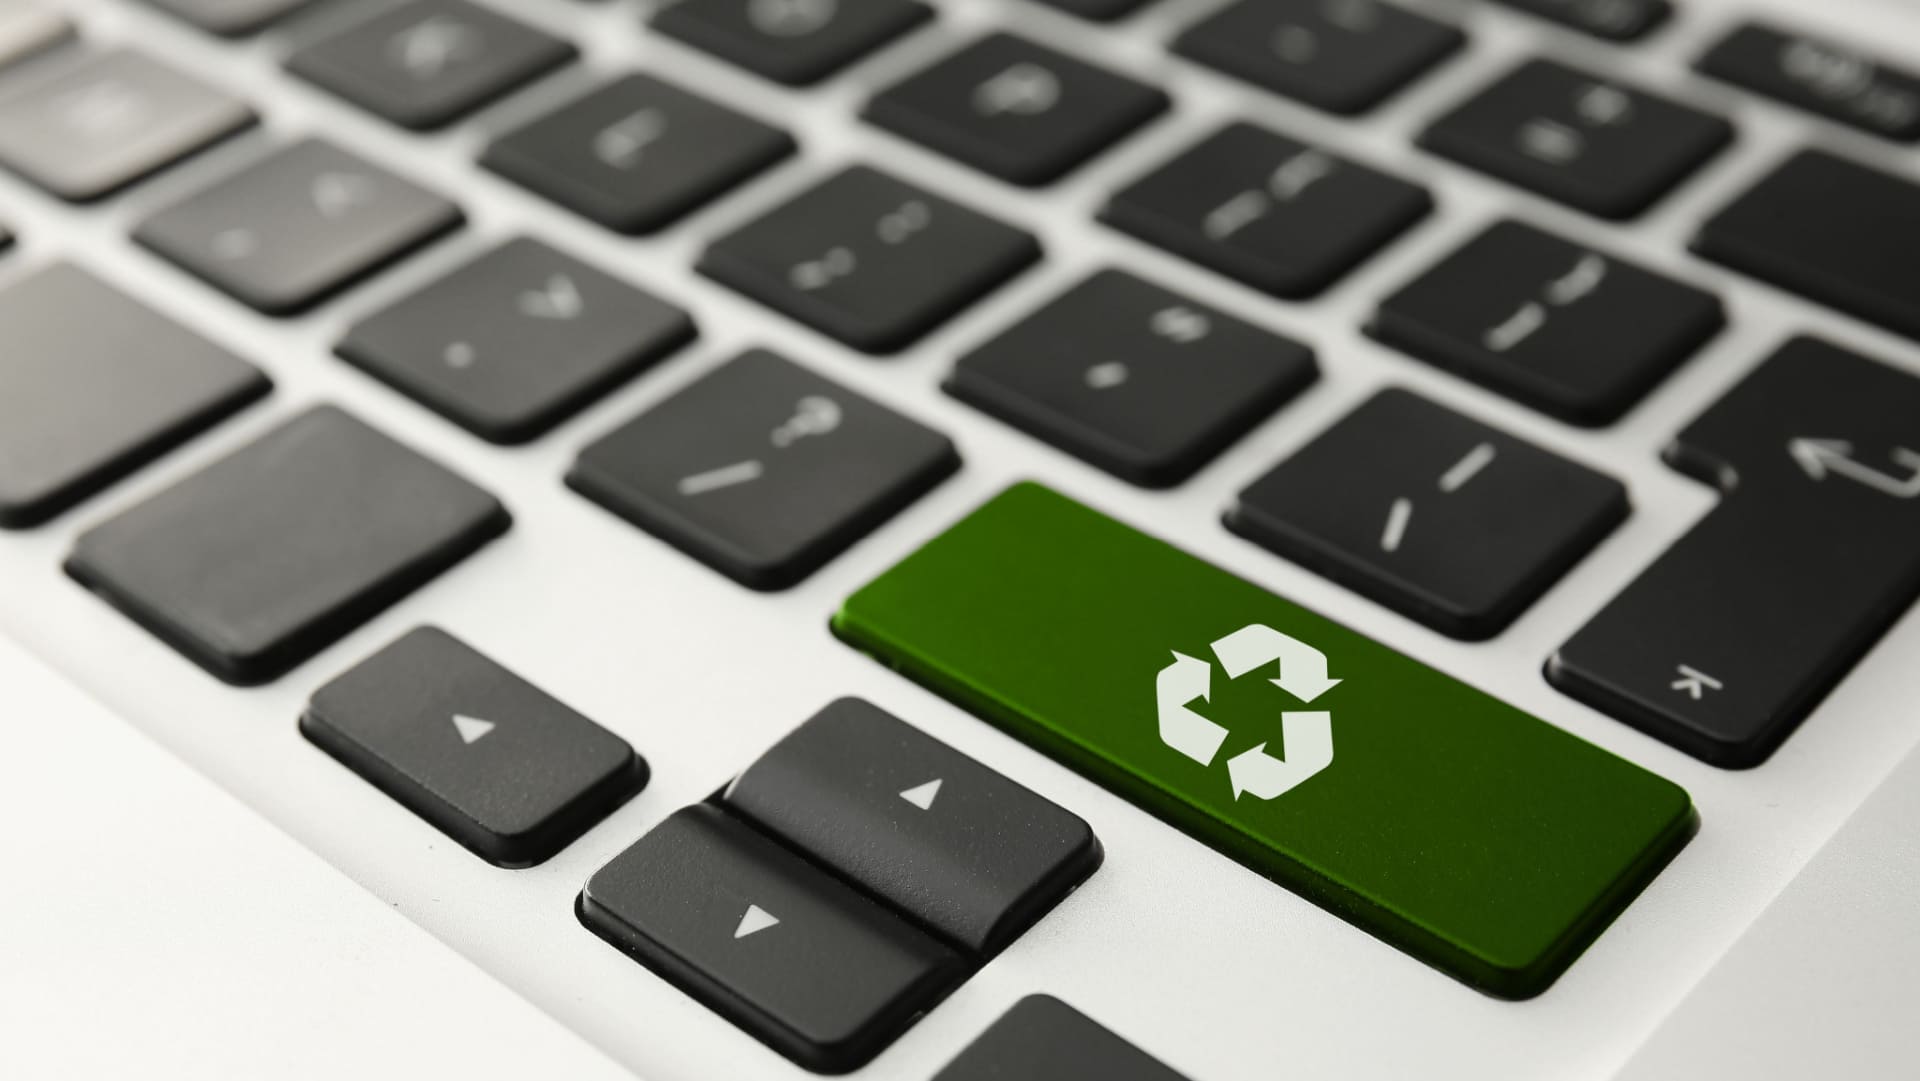 Benefits of Upgrading to Green Electronics